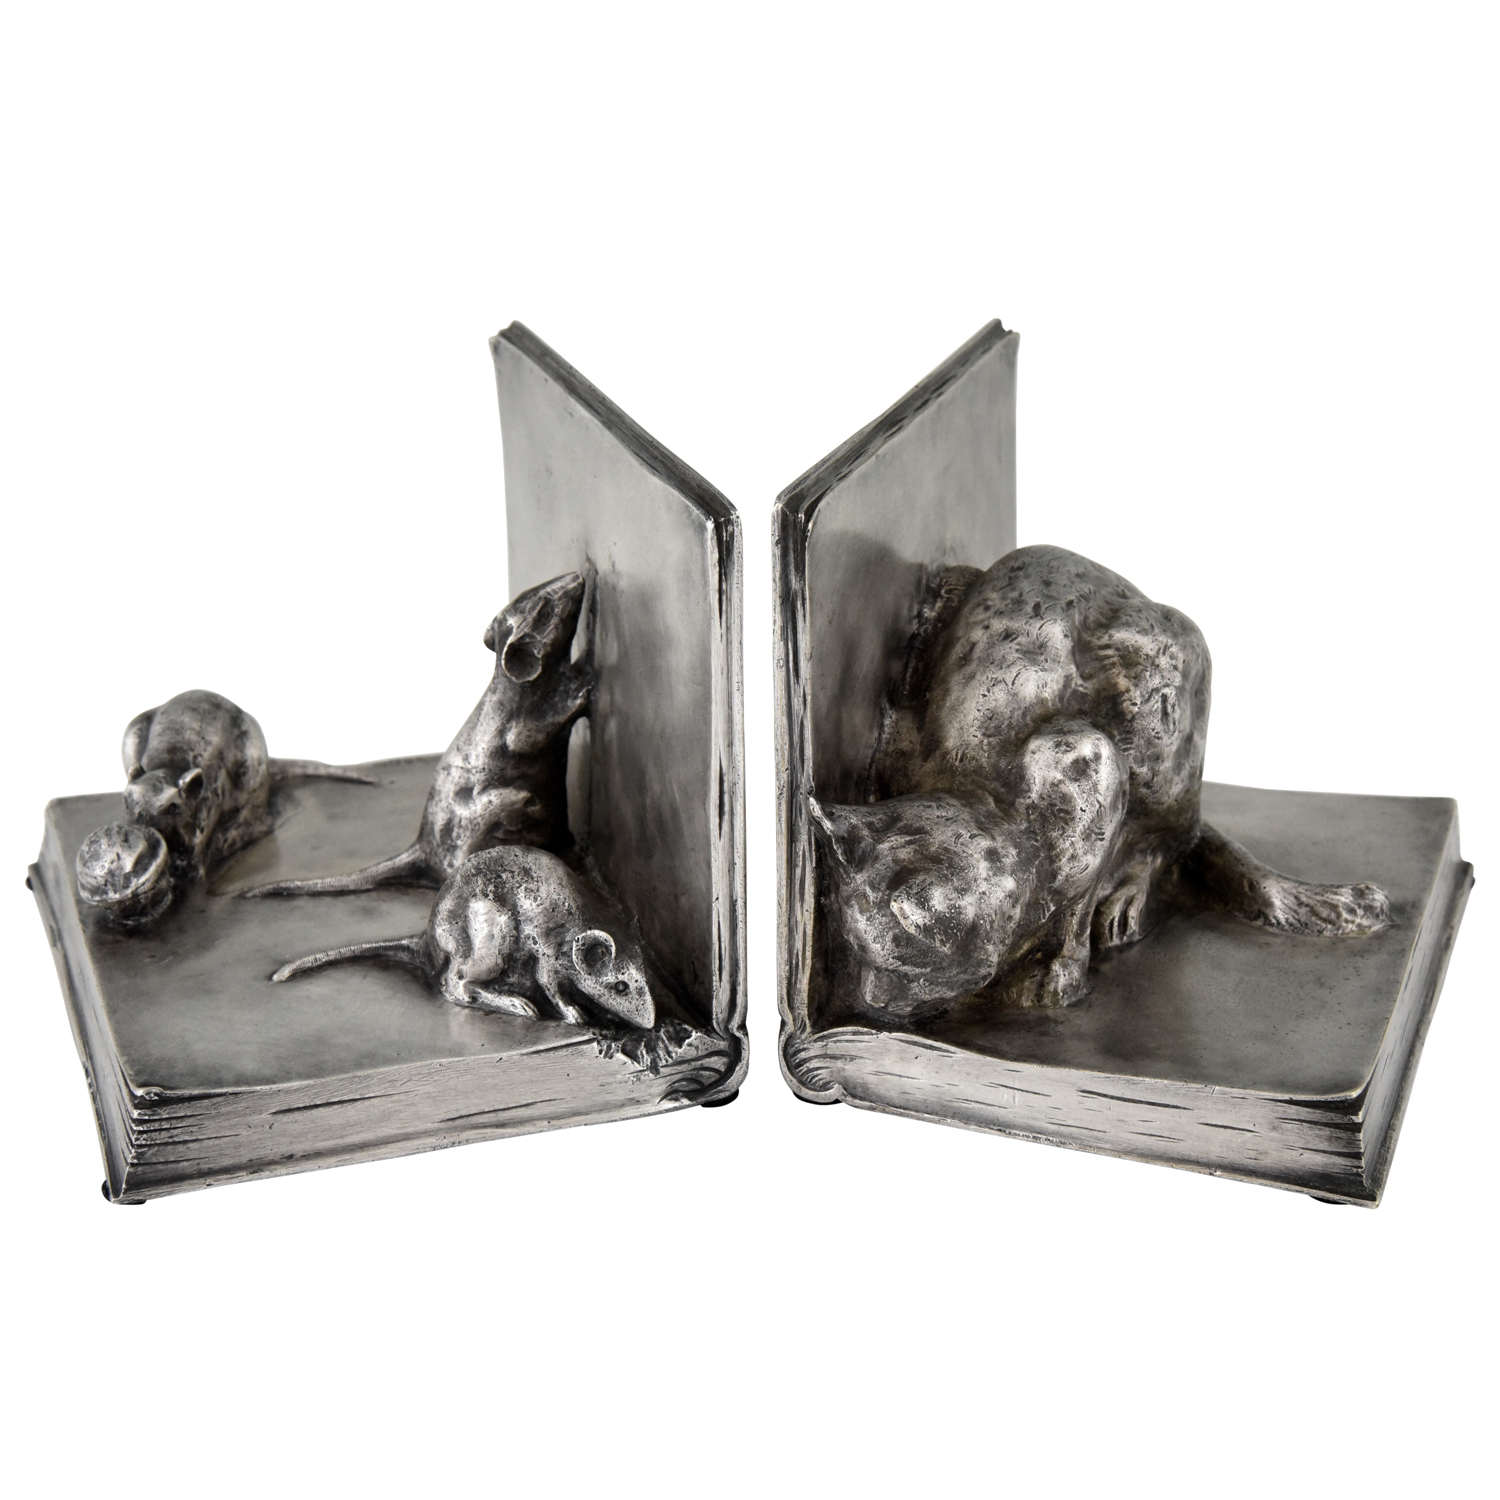 Art Deco bronze bookends, cat and mice on books.